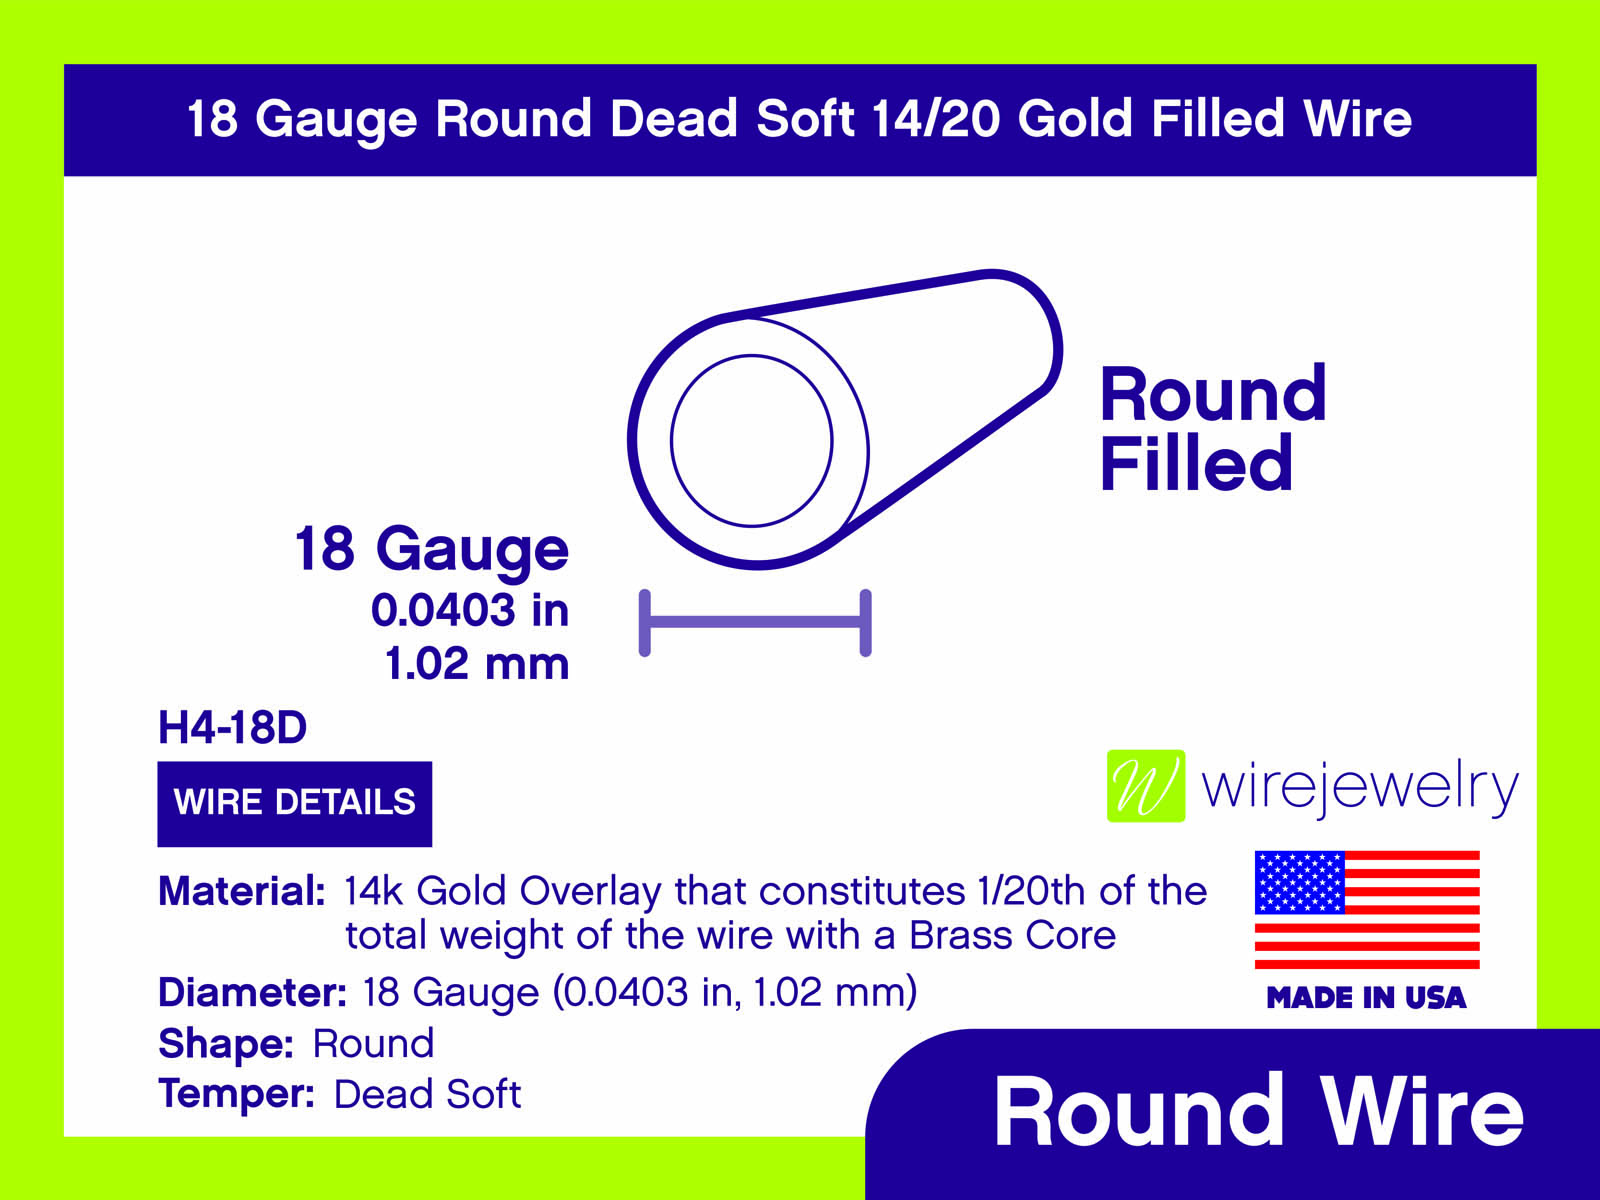 14/20 Yellow Gold-Filled Round Wire, Dead-Soft